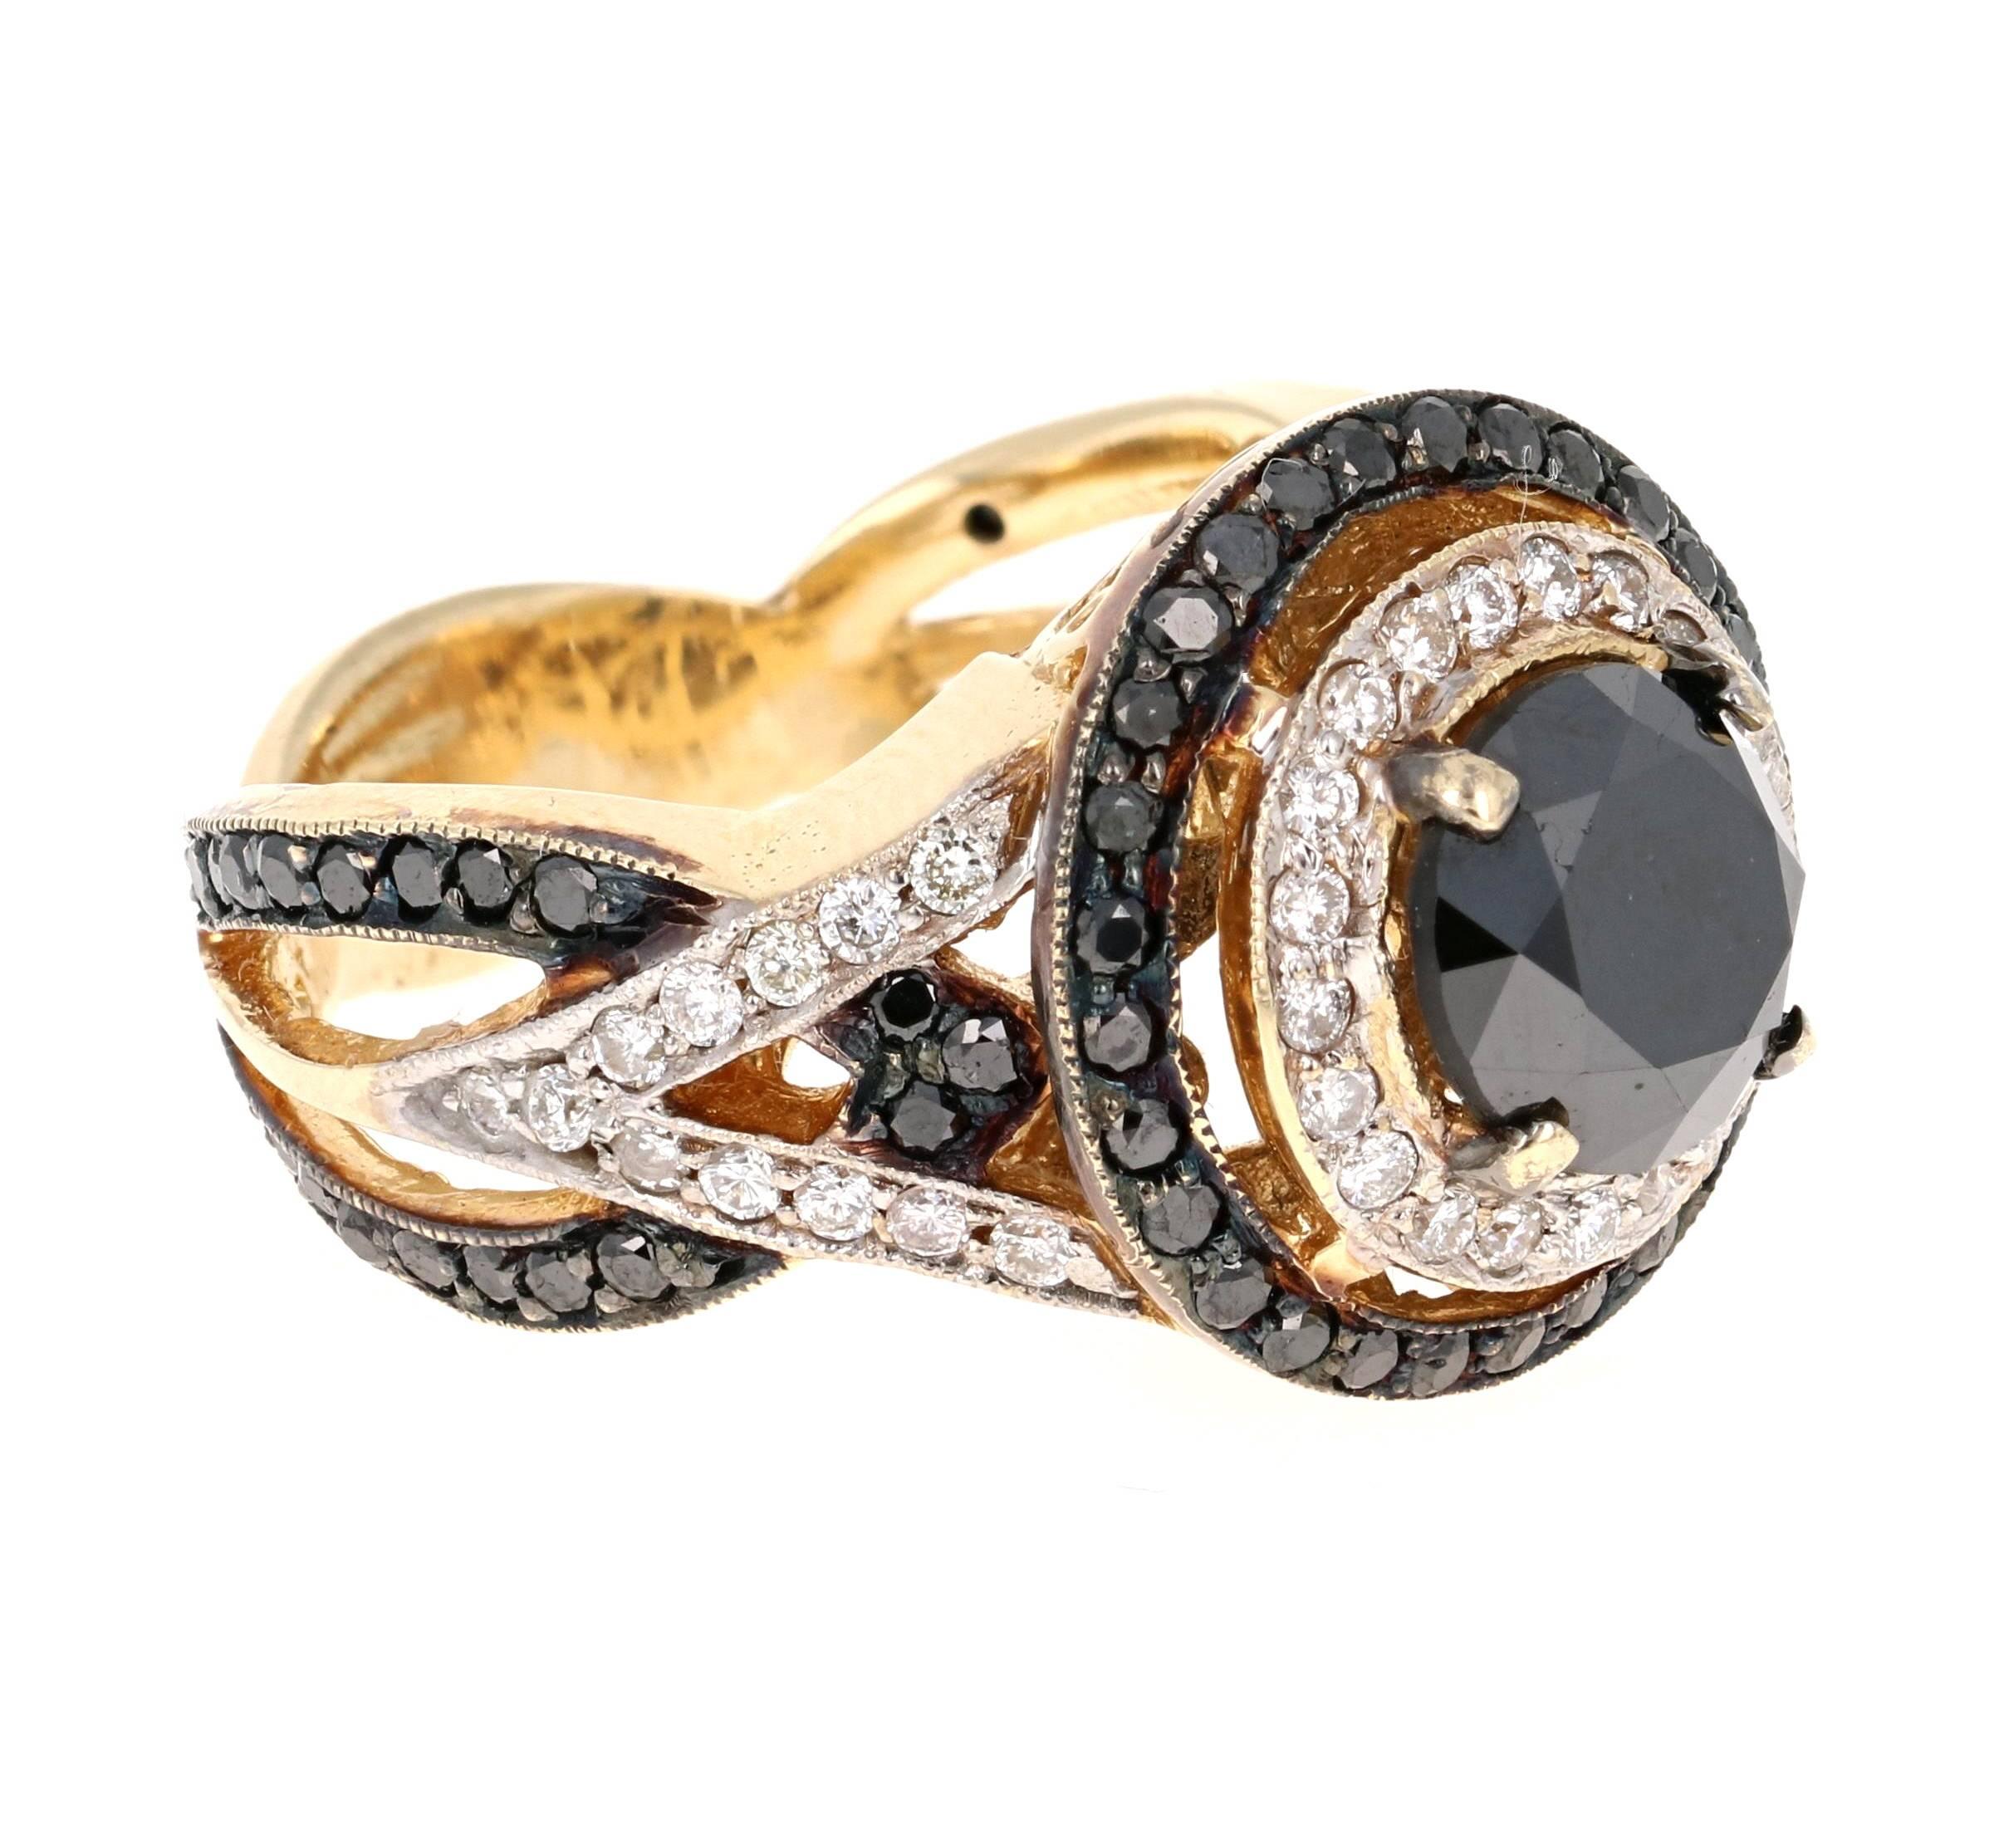 Gorgeous Black Diamond ring that can transform into an Engagement ring.  There is a 2.68 carat Round Cut Black Diamond in the center on the ring which is surrounded by 44 White Round Cut Diamonds that weigh 0.55 carat and 72 Black Round Cut Diamonds